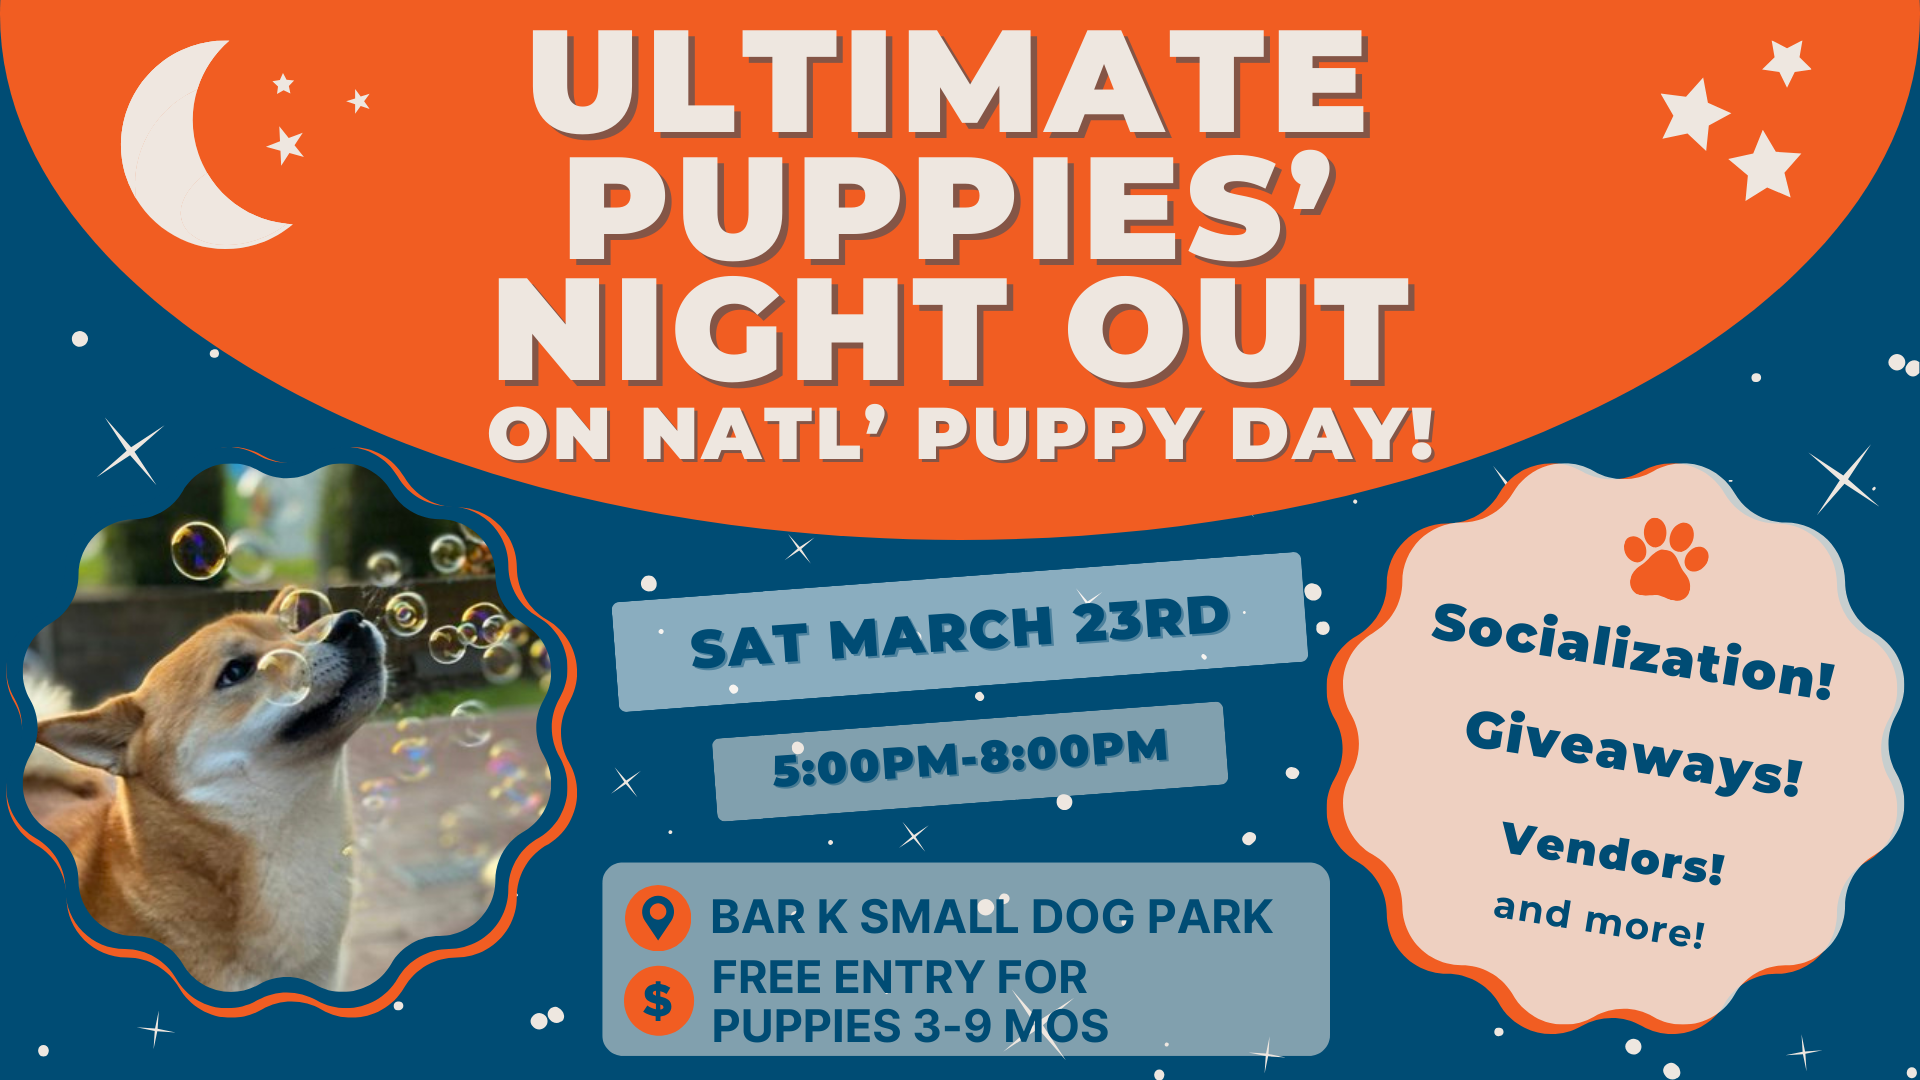 ultimate puppies' night out on national puppy day! Sat March 23rd from 5 pm to 8pm. Bar K Small dog park. Free entry for puppies 3 to 9 months. Socialization, giveaways, vendors, and more.